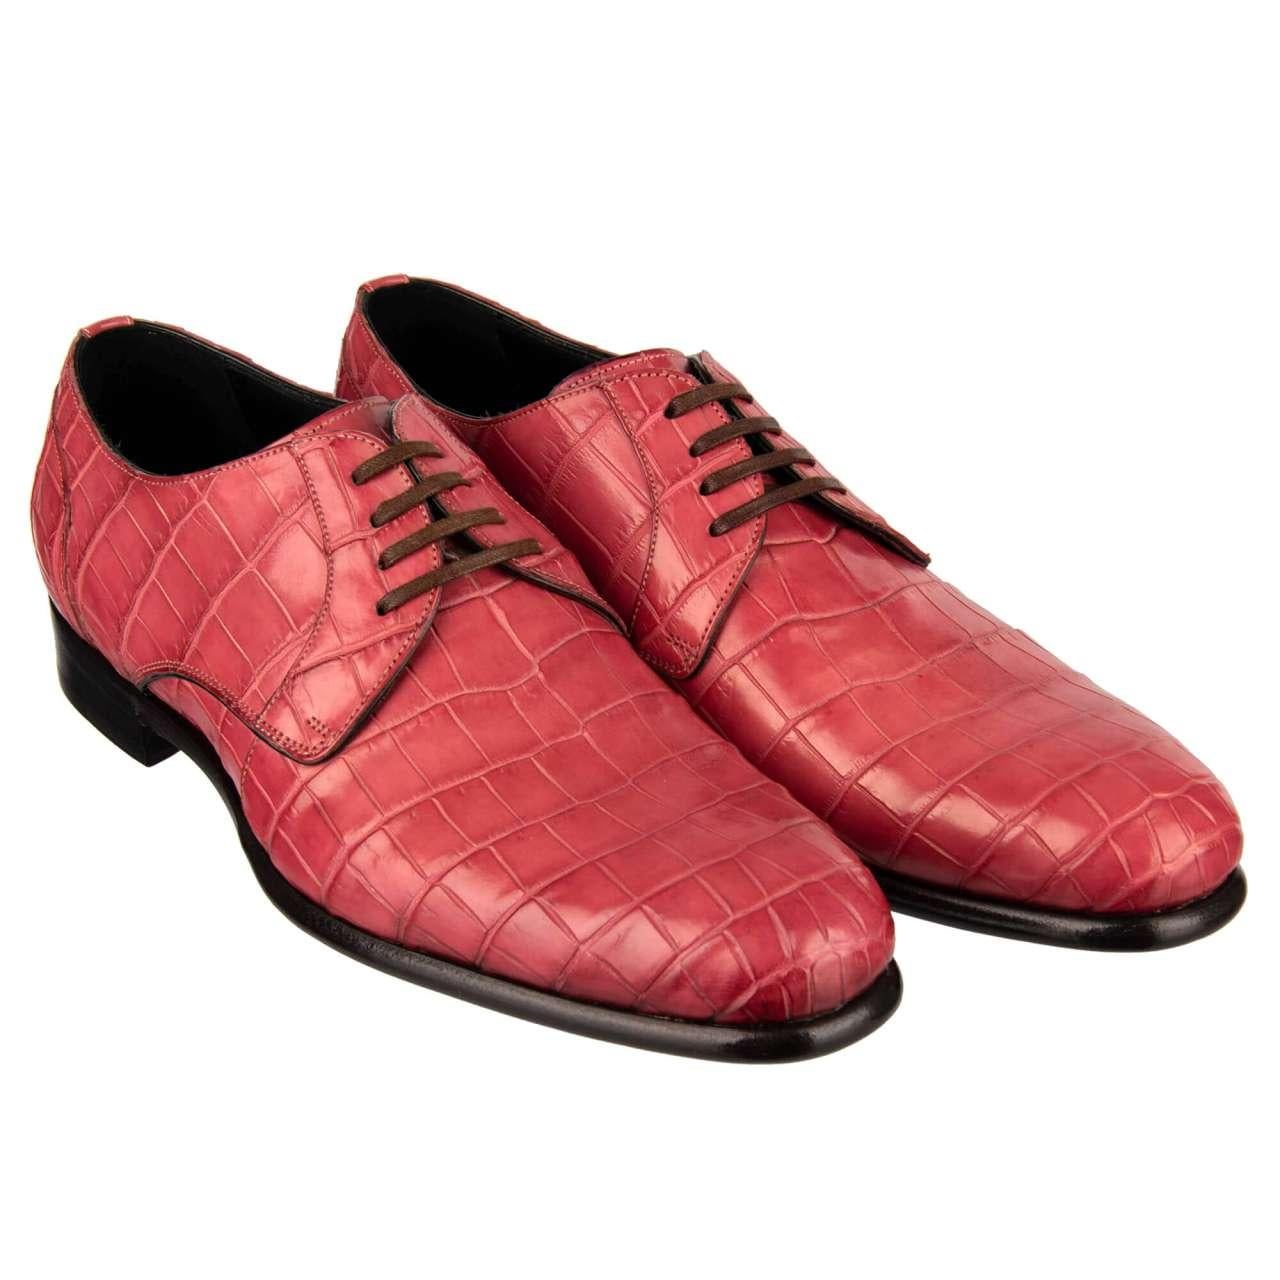 Dolce & Gabbana Crocodile Leather Derby Shoes SIENA Pink EUR 39 For Sale 3